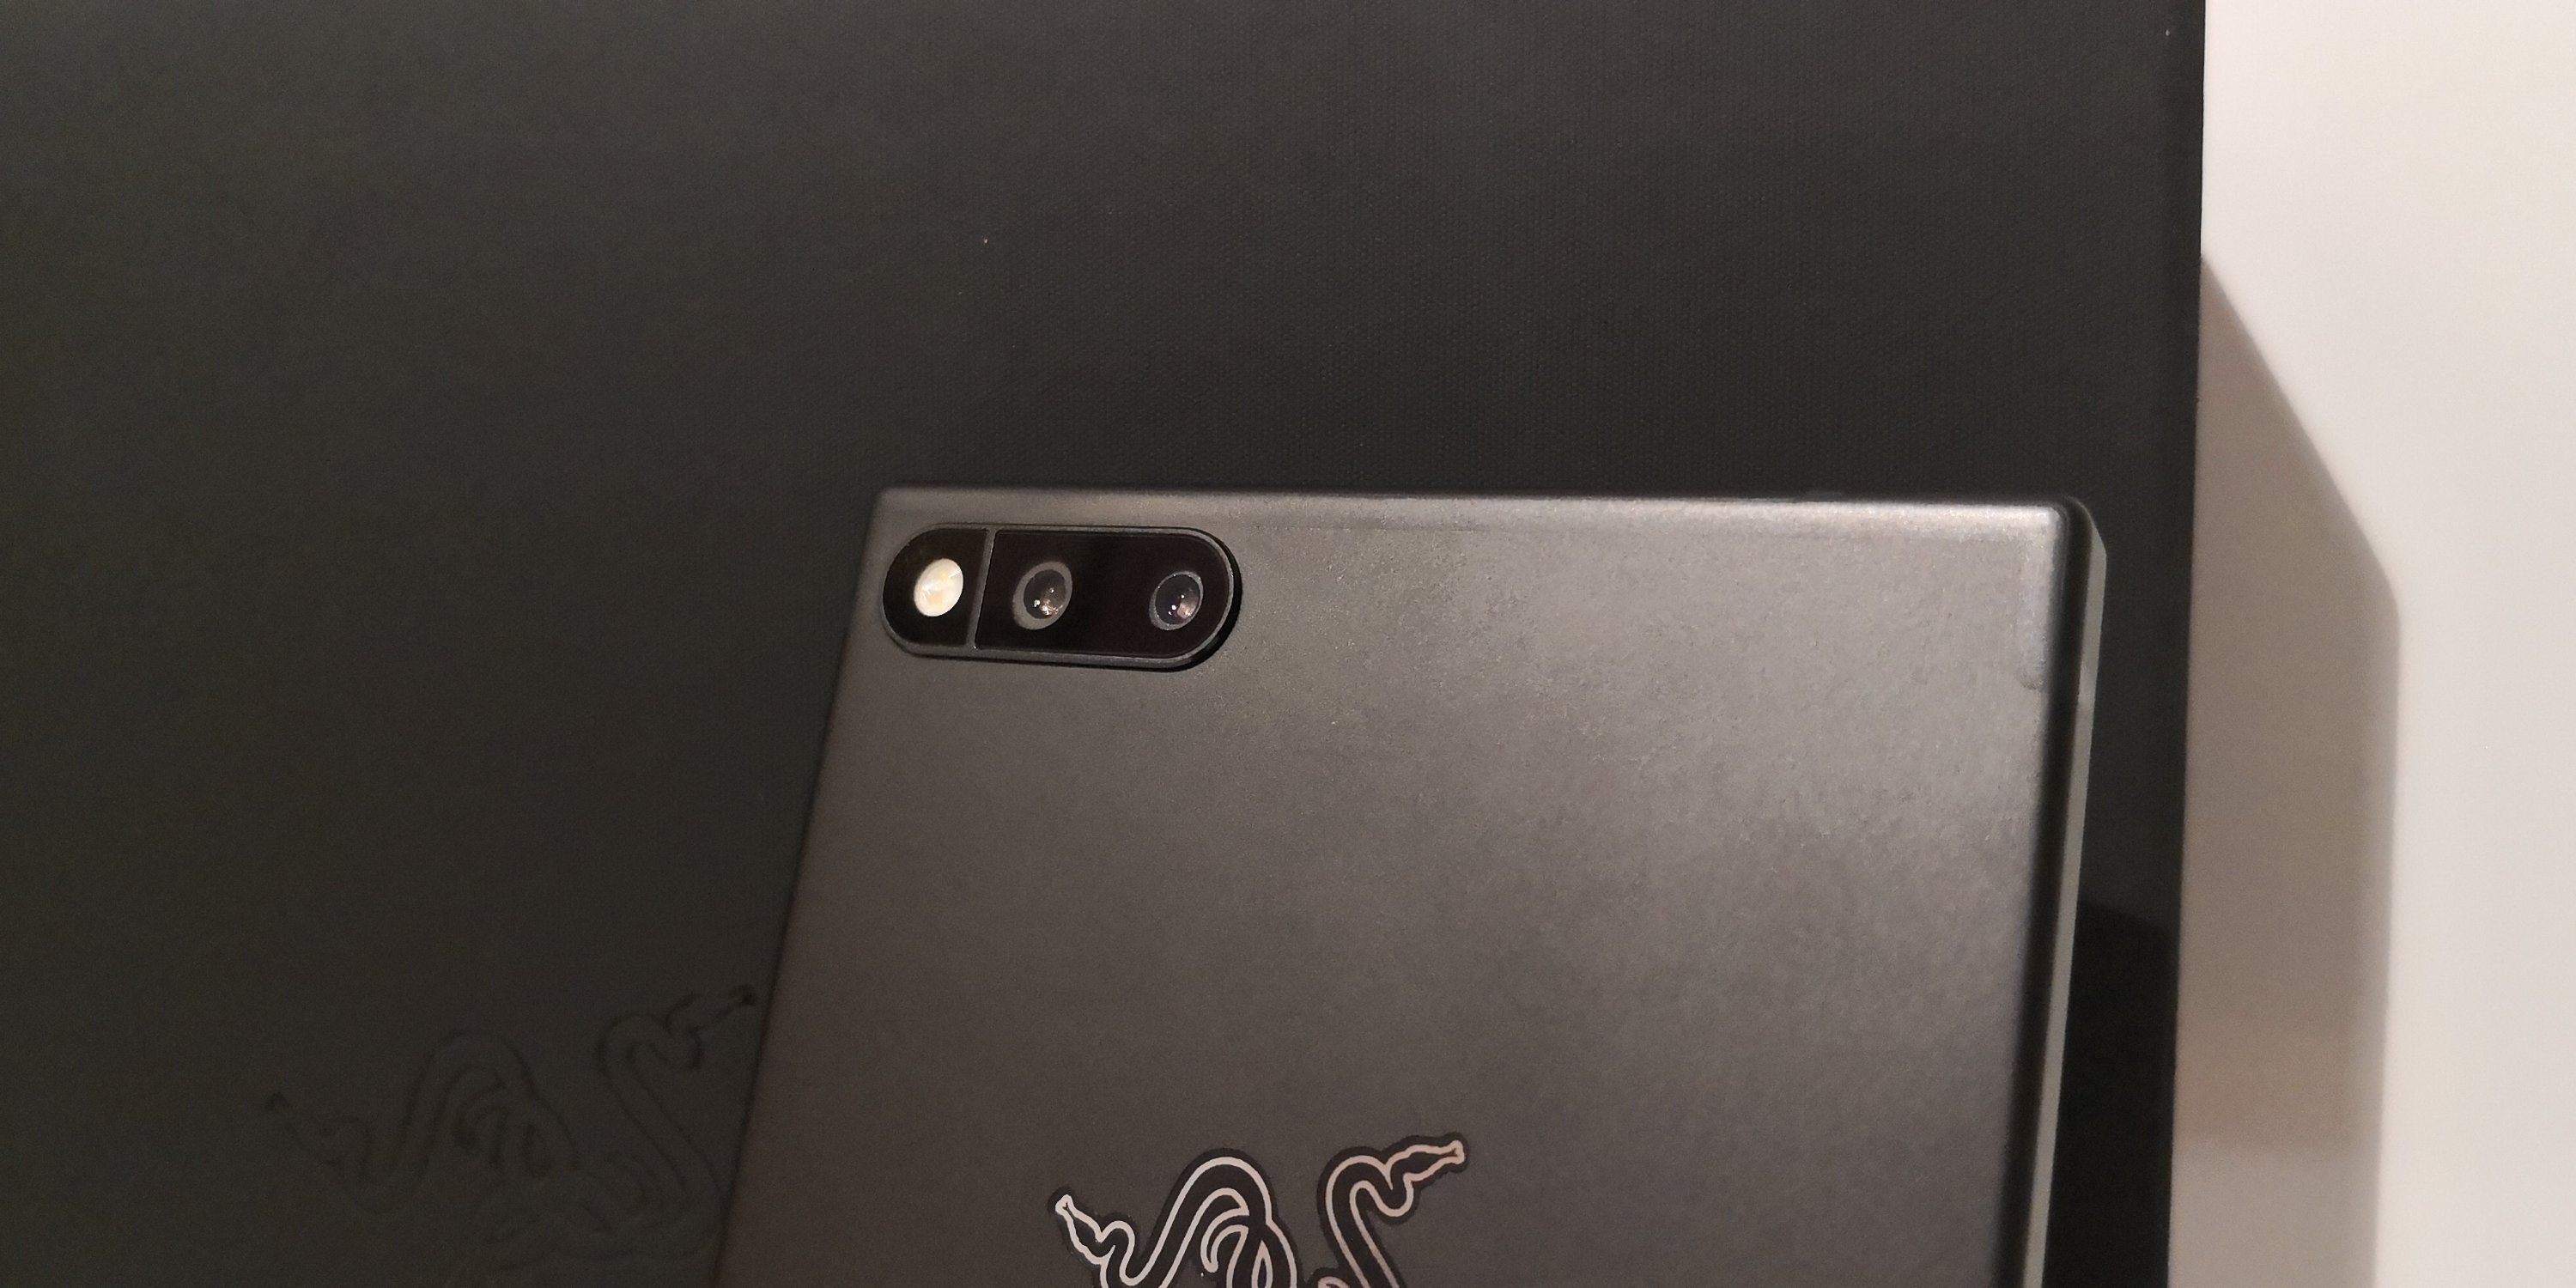 The Razer Phone has arrived. Here is our unboxing